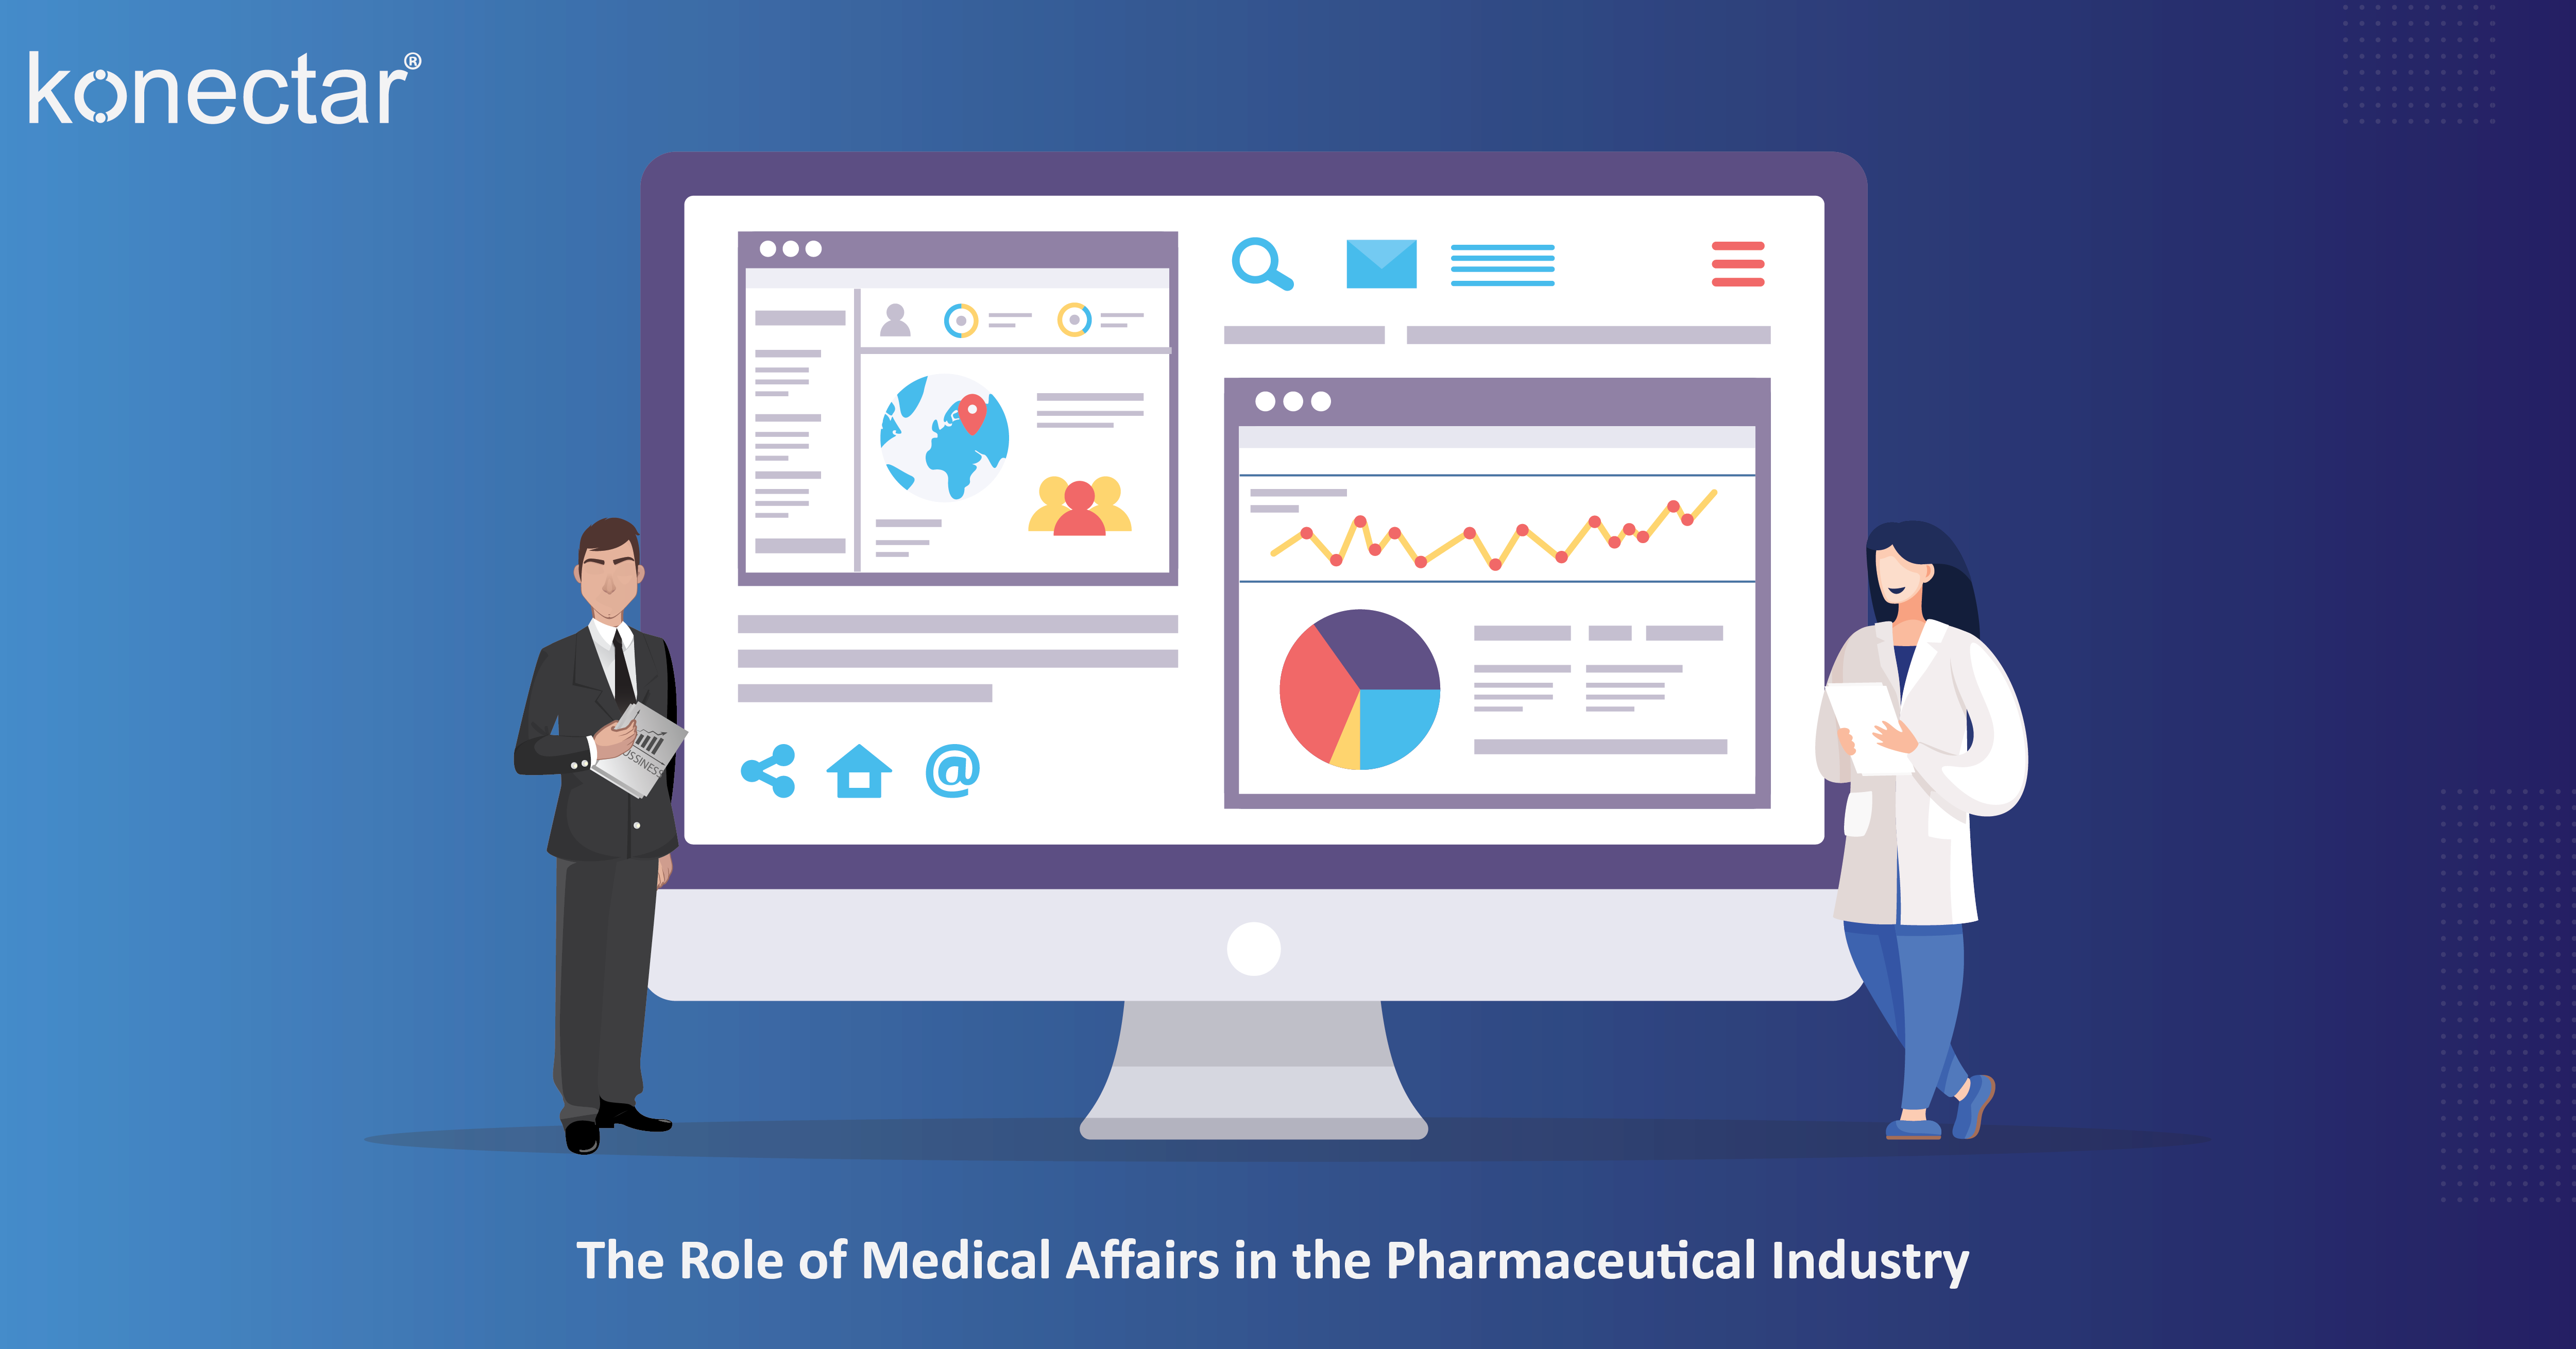 The Role of Medical Affairs in the Pharmaceutical Industry